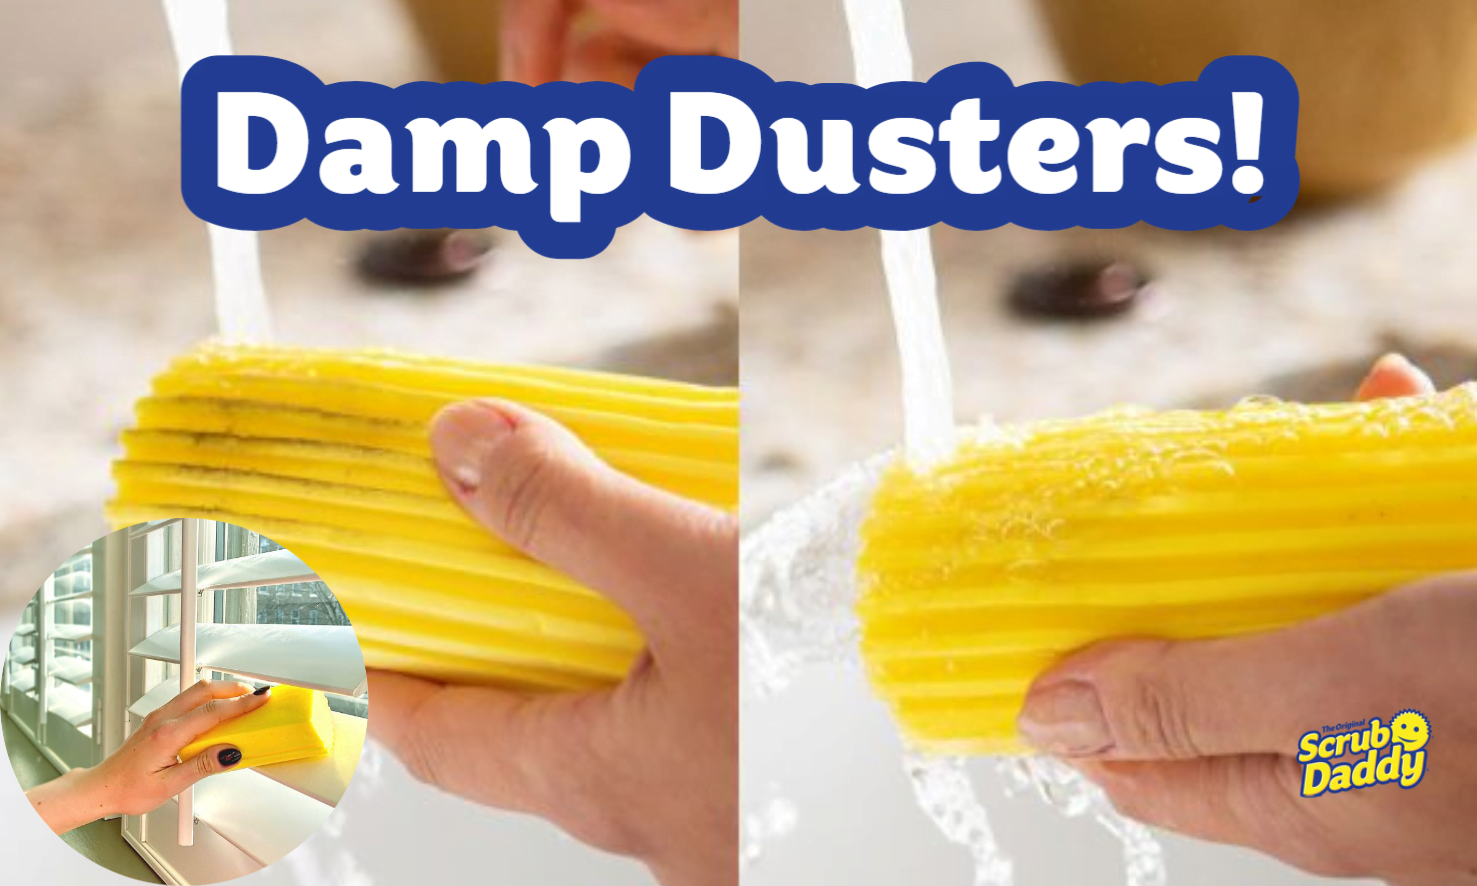 https://scrubdaddy.co.uk/wp-content/uploads/2022/02/Damp-Dusters.png